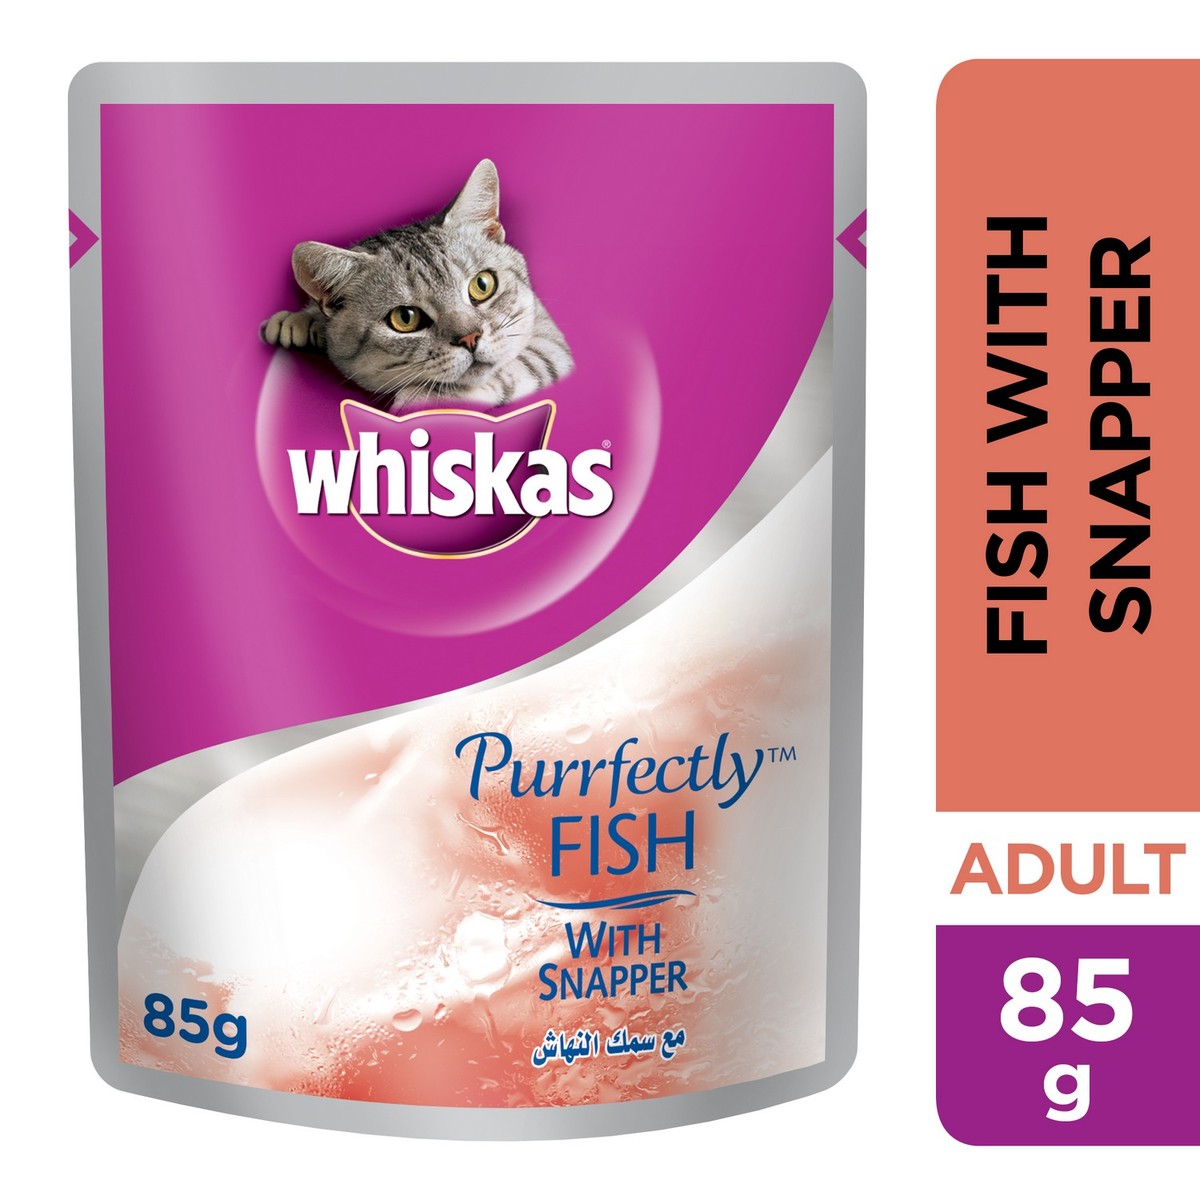 Whiskas® Purrfectly Fish with Snapper Pouch 85 g